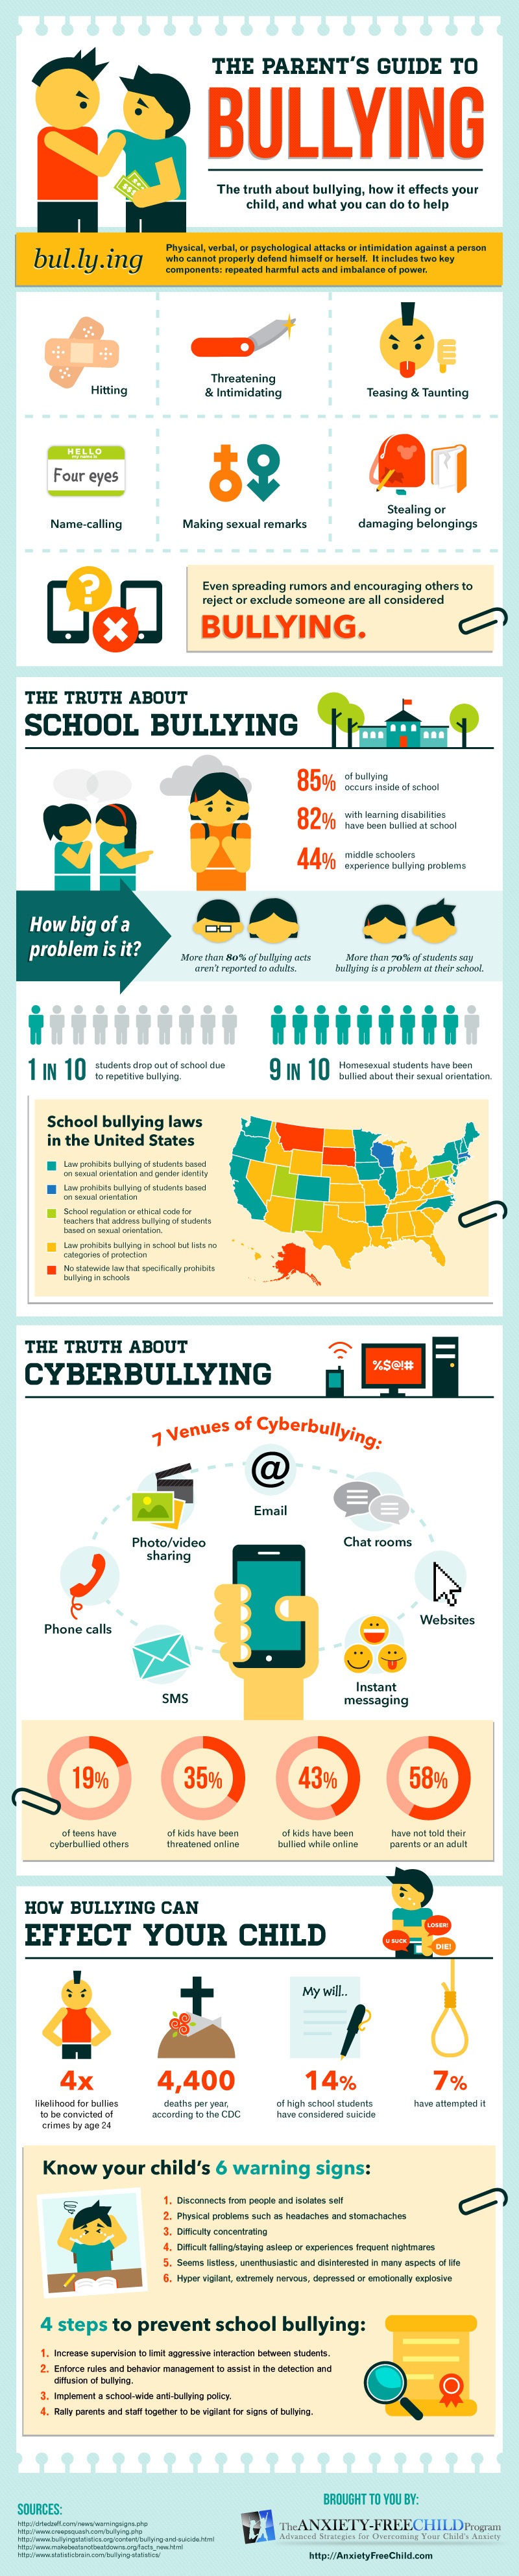 The Parents' Guide to Bullying Infographic - e-Learning Infographics